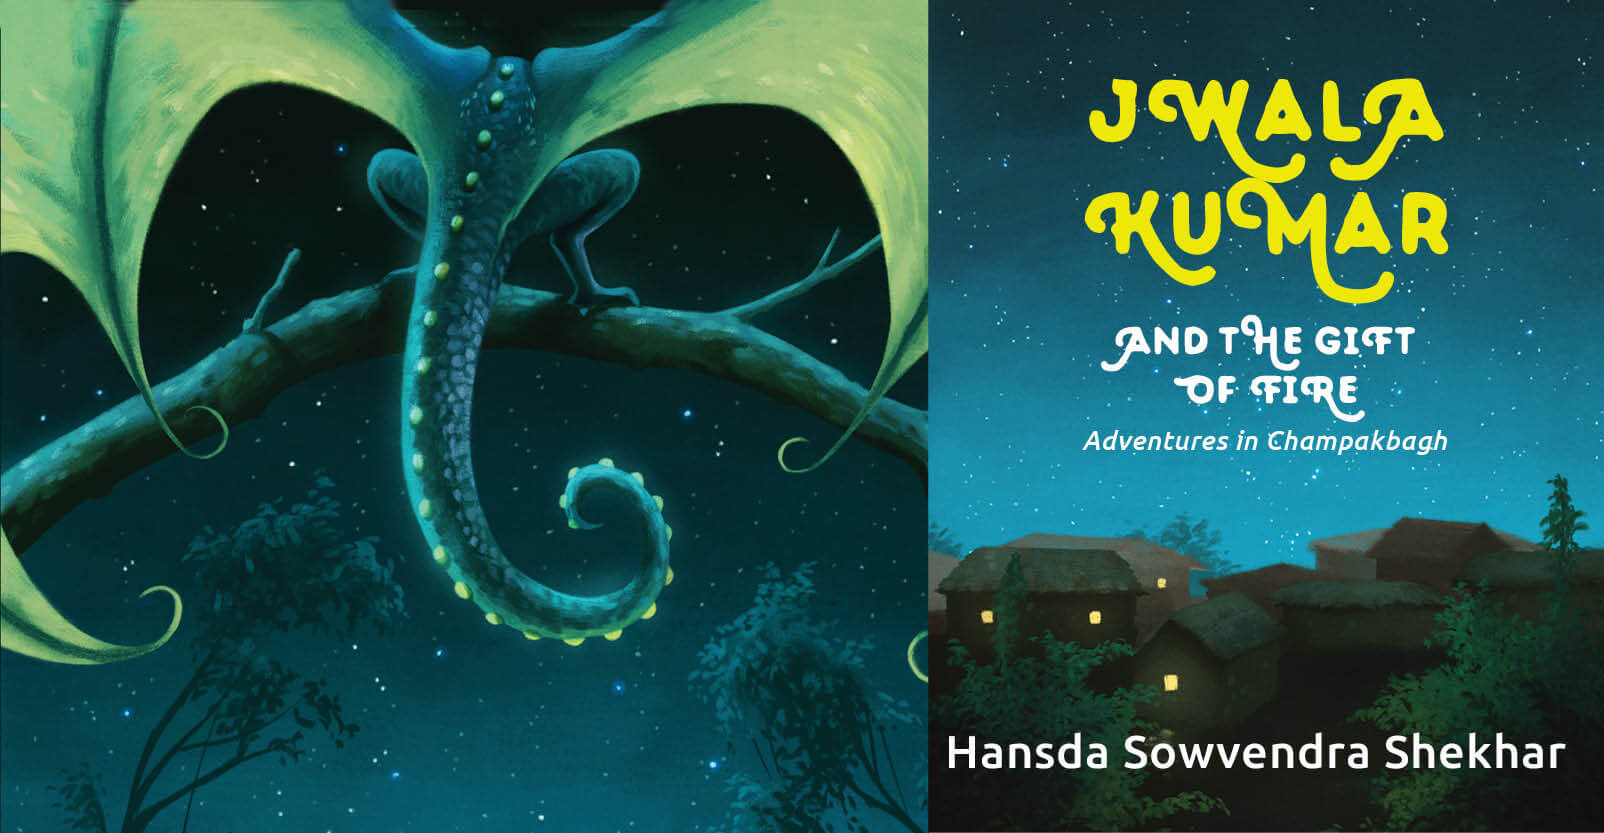 How Game of Thrones inspired a children’s book set in Jharkhand